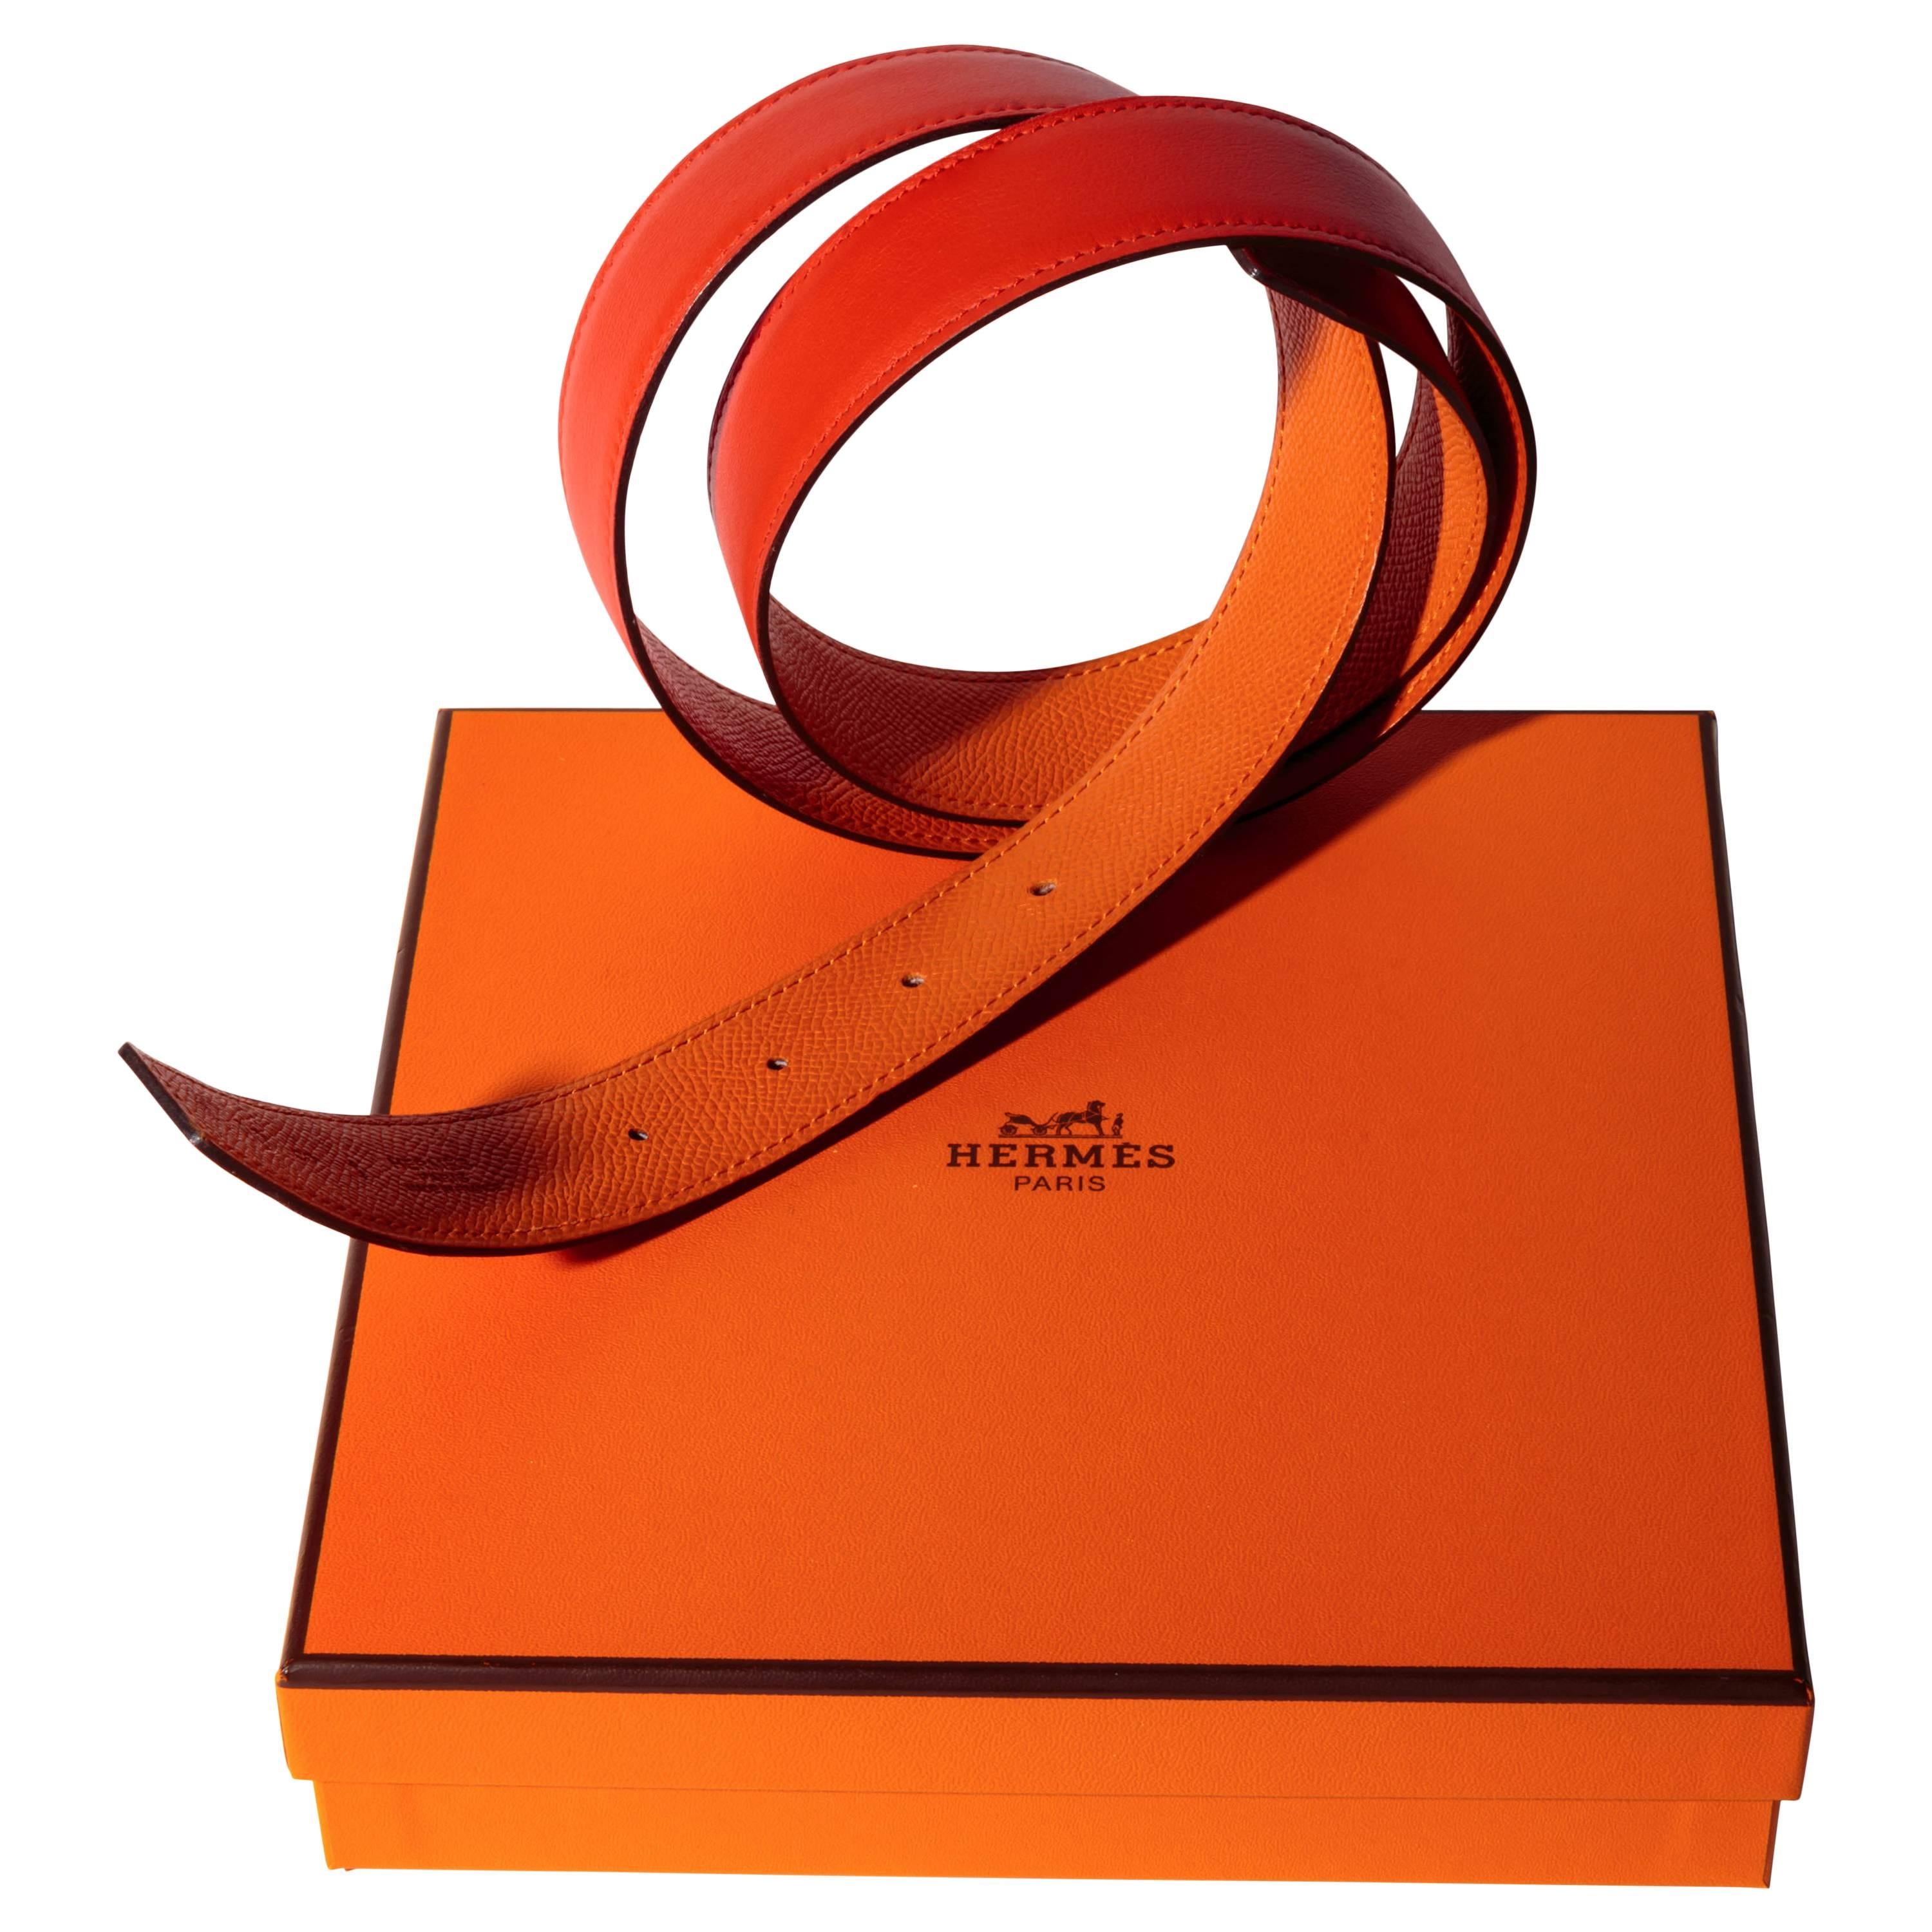 Hermes Replacement Belt in Orange Leather - 90 Cm